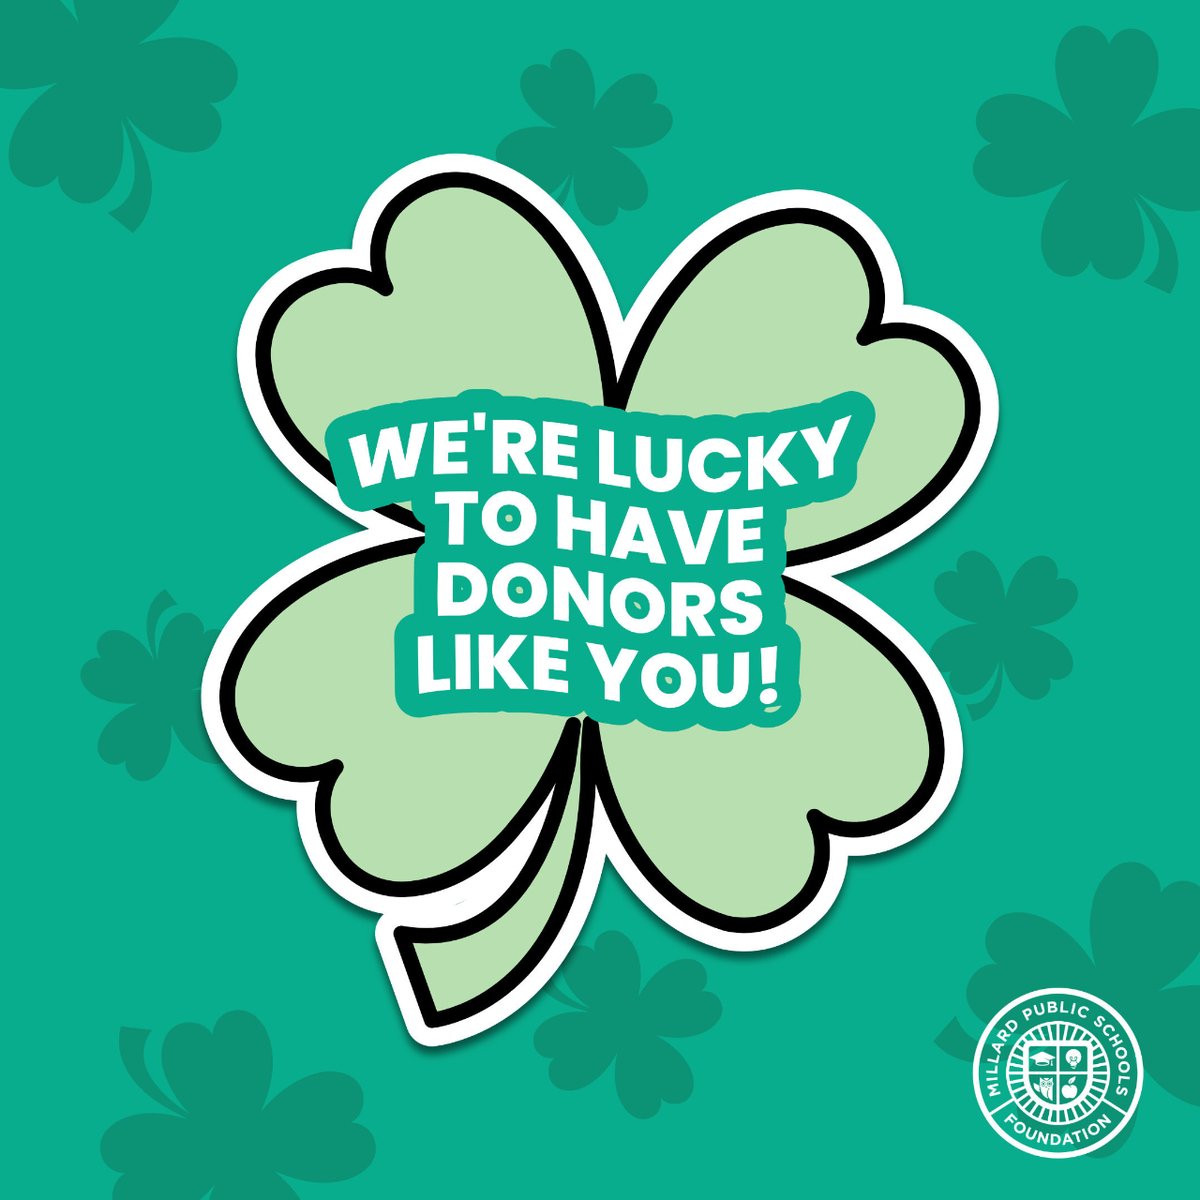 Thanks to our amazing donors, we are 🍀lucky🍀 enough to support the teachers, students and staff at Millard Public Schools! Thank you for your continued support!